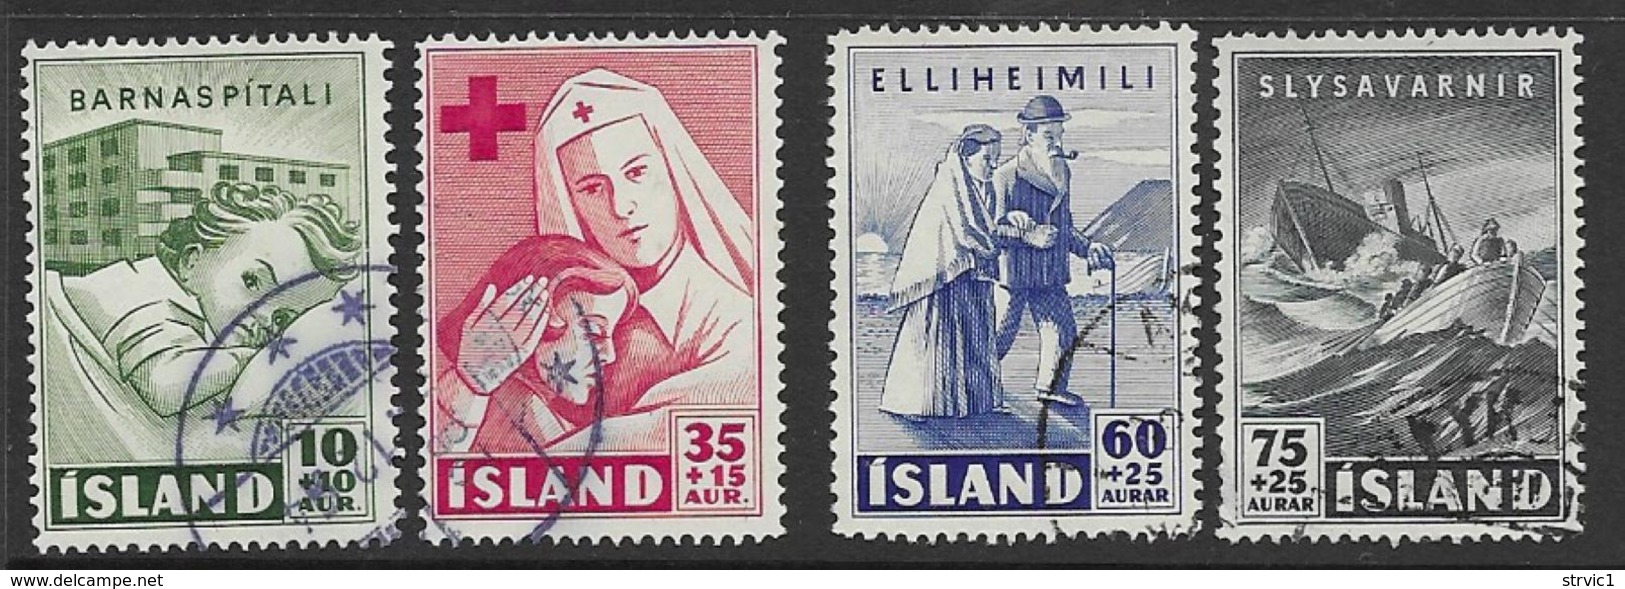 Iceland Scott # B7-8,B10-11 Used Charities, 1949 - Used Stamps